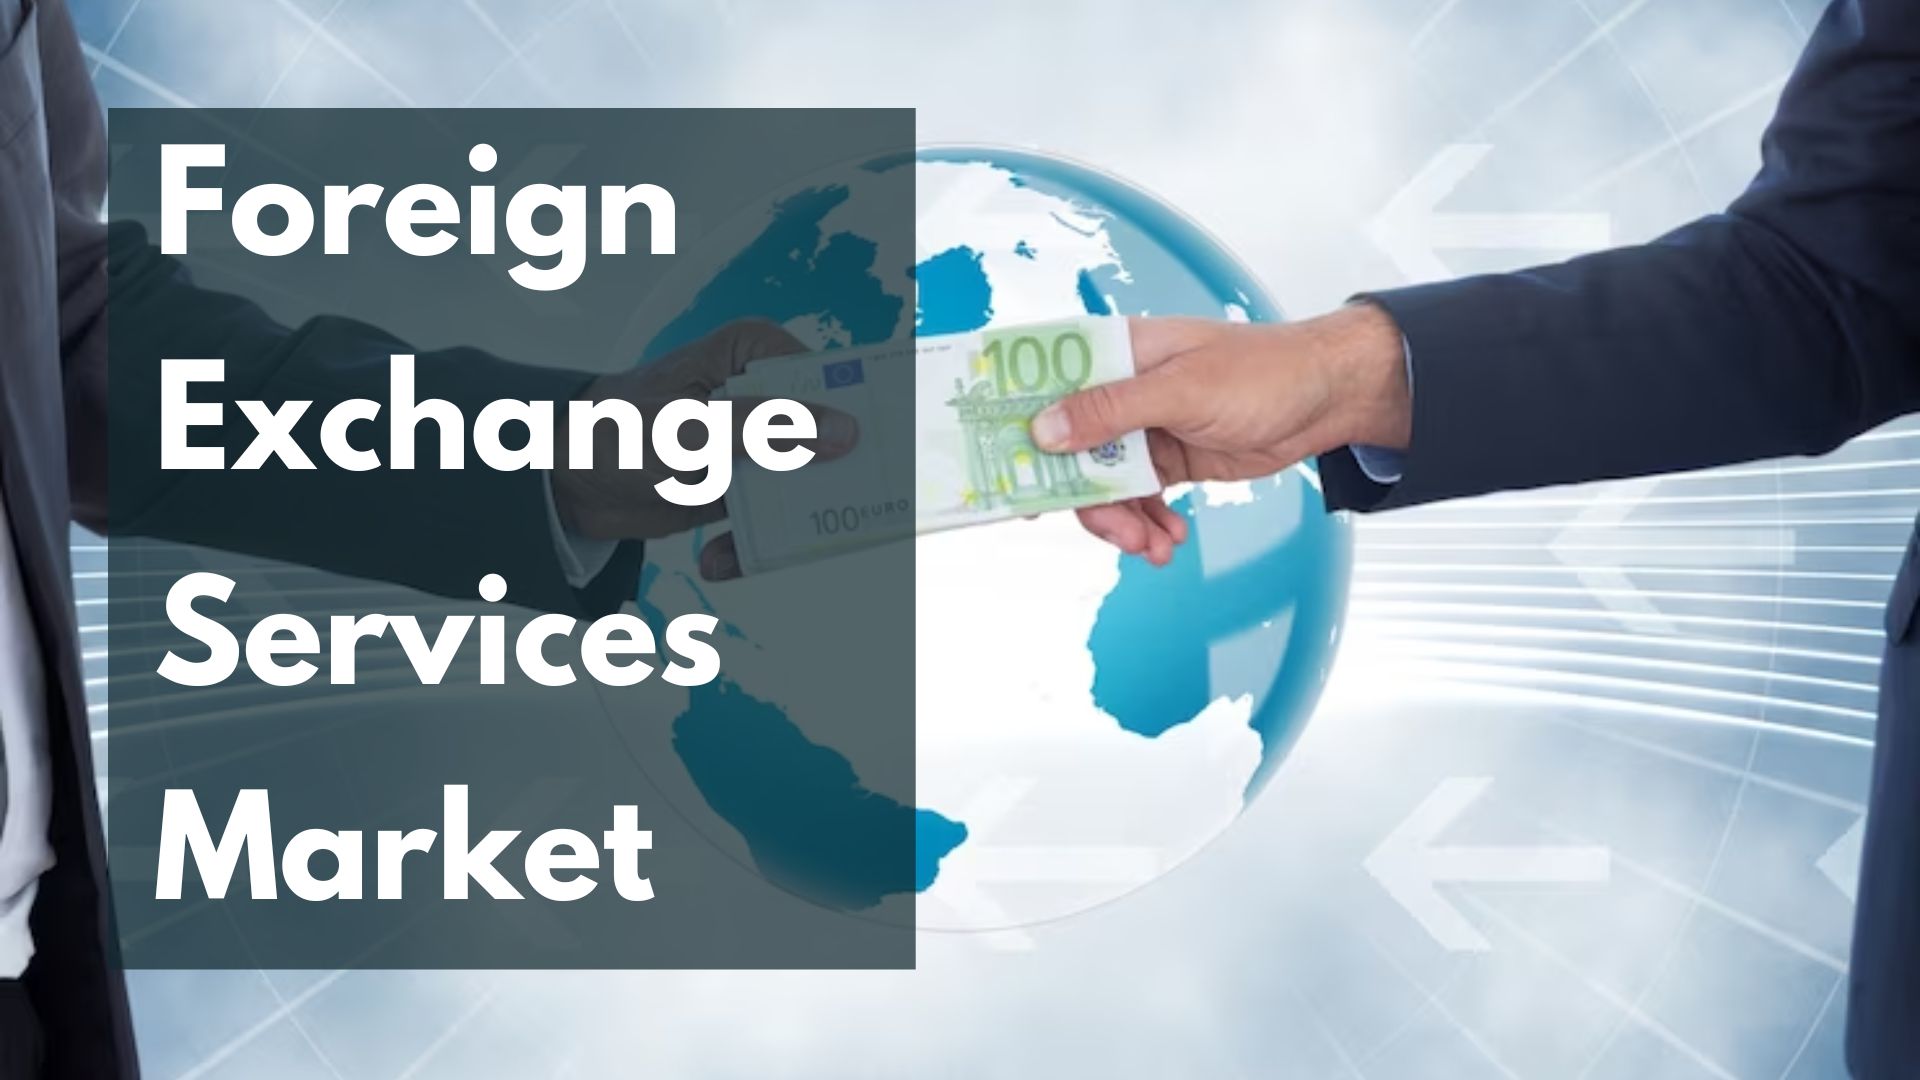 Foreign Exchange Services Market Dynamics: Exploring Currency Exchange, Remittance, and More